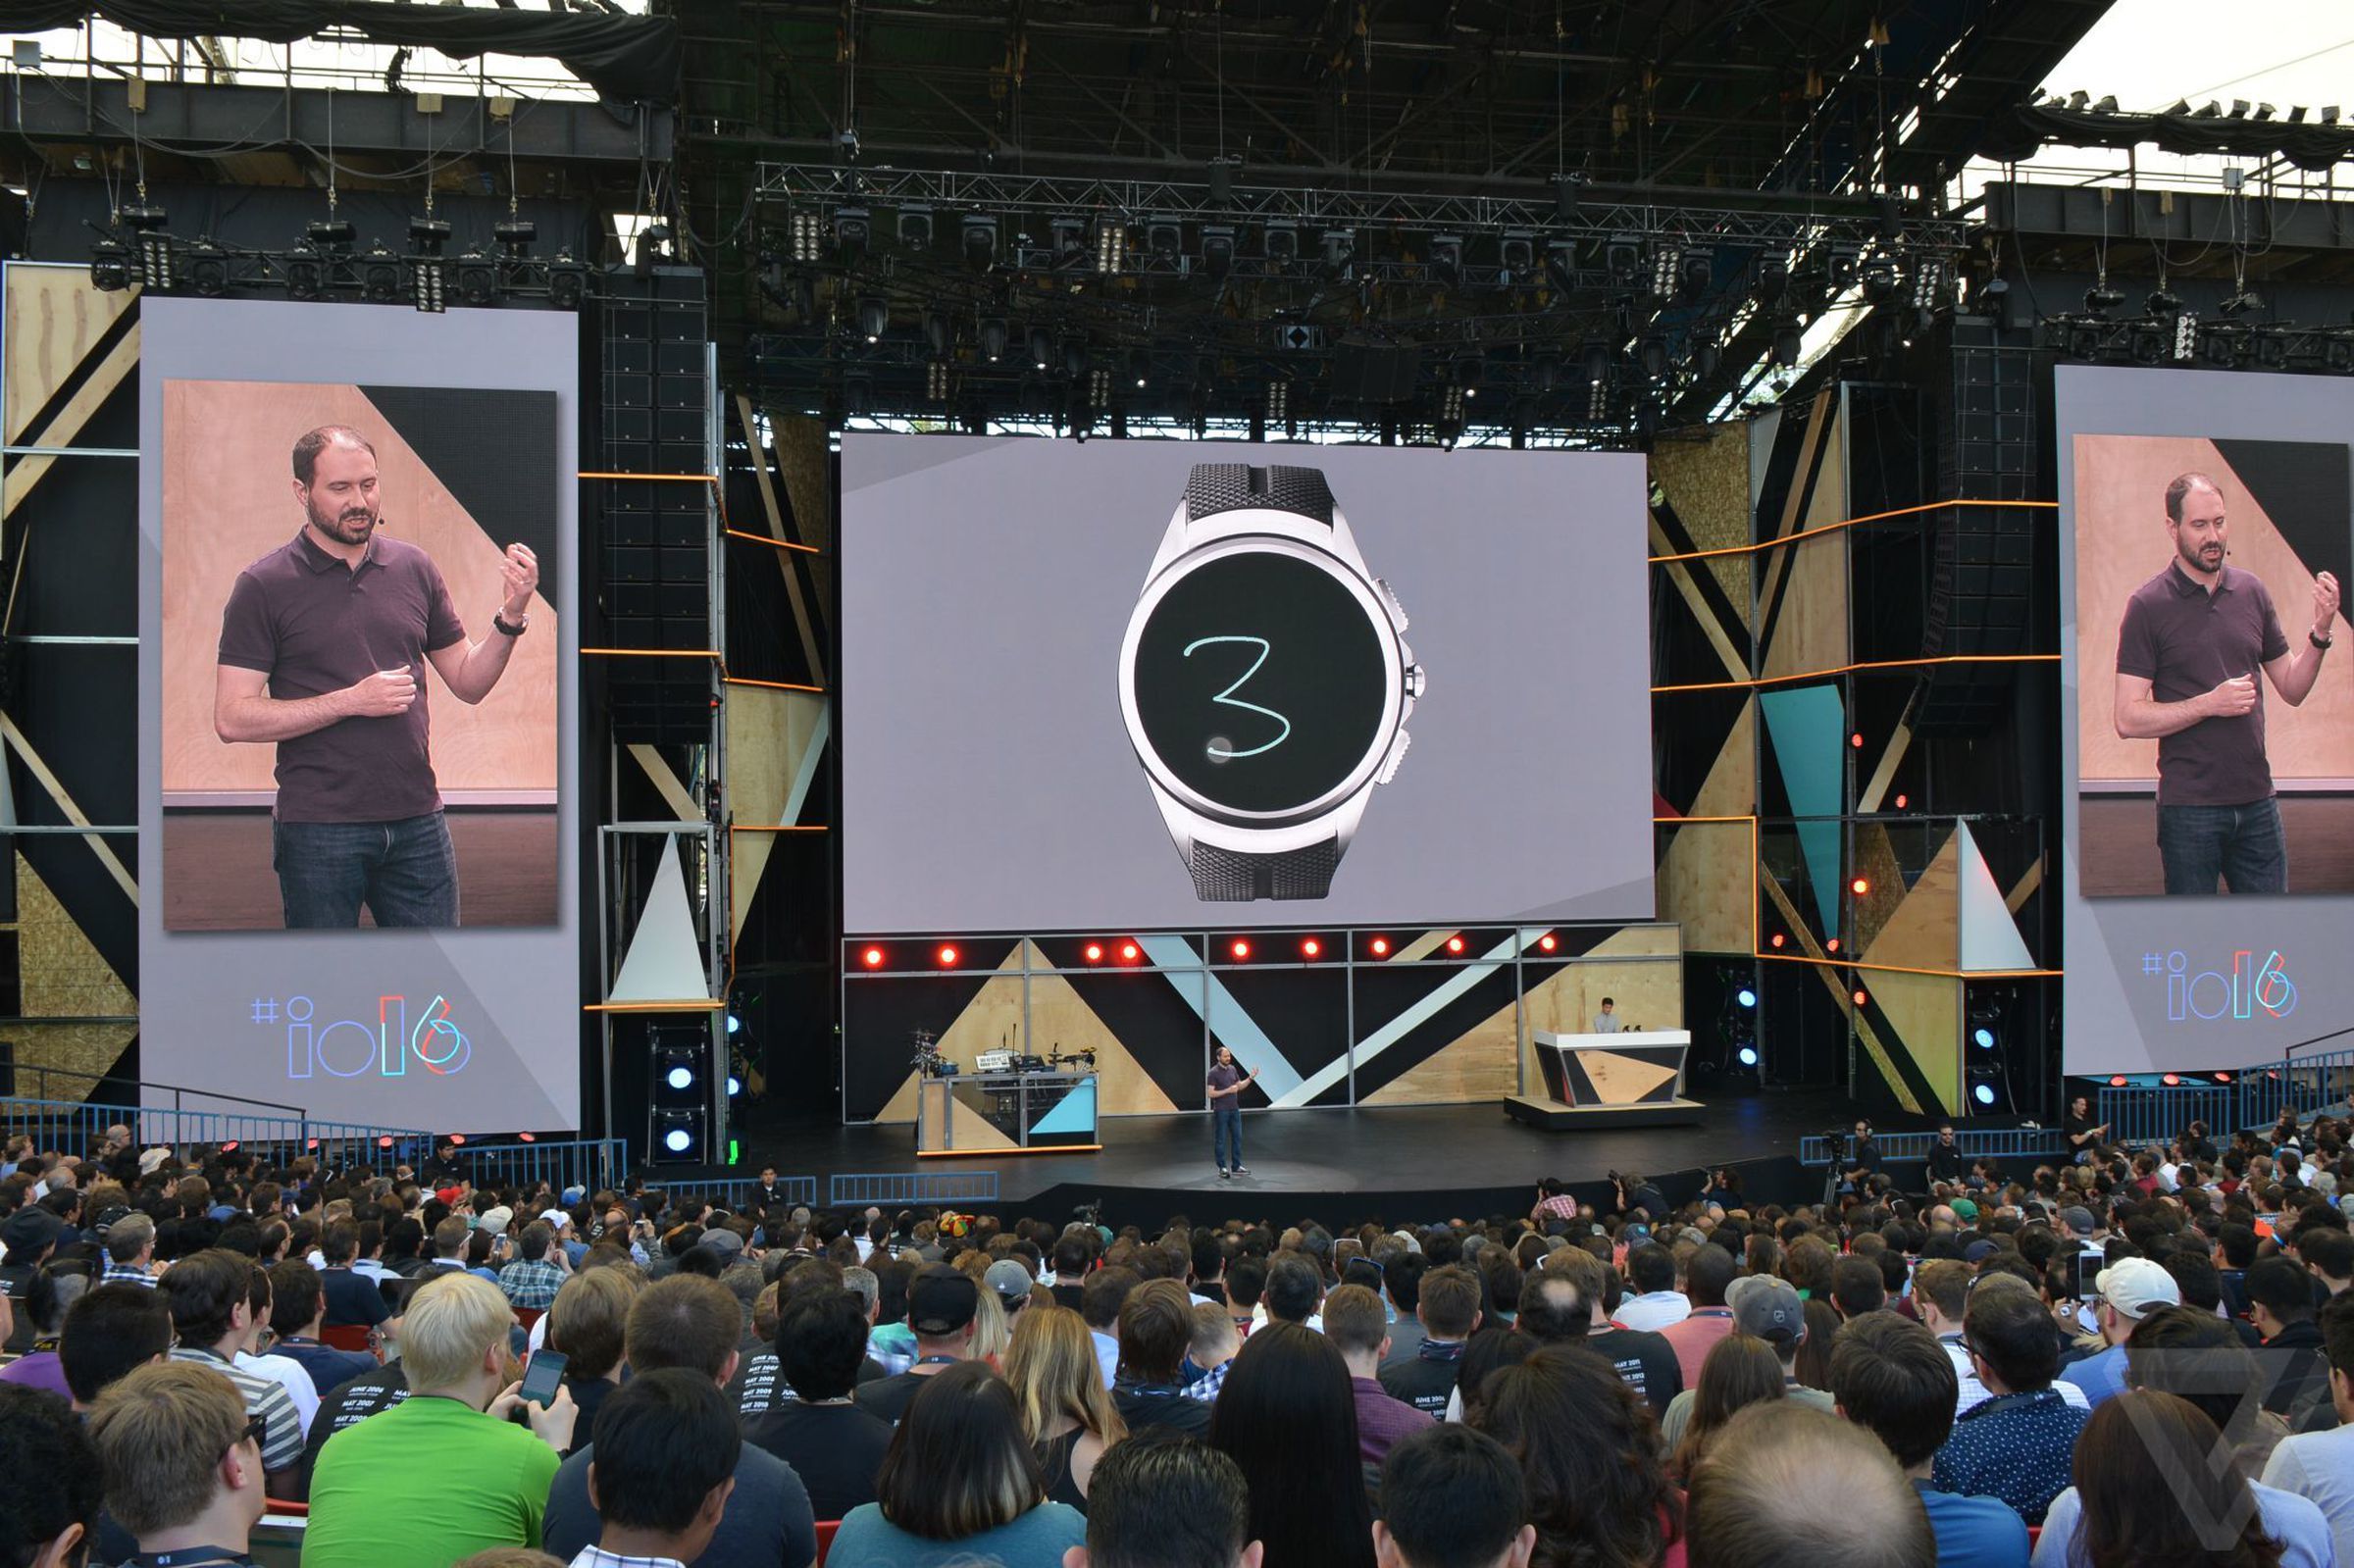 Android Wear 2.0 at Google I/O 2016 announcement photos